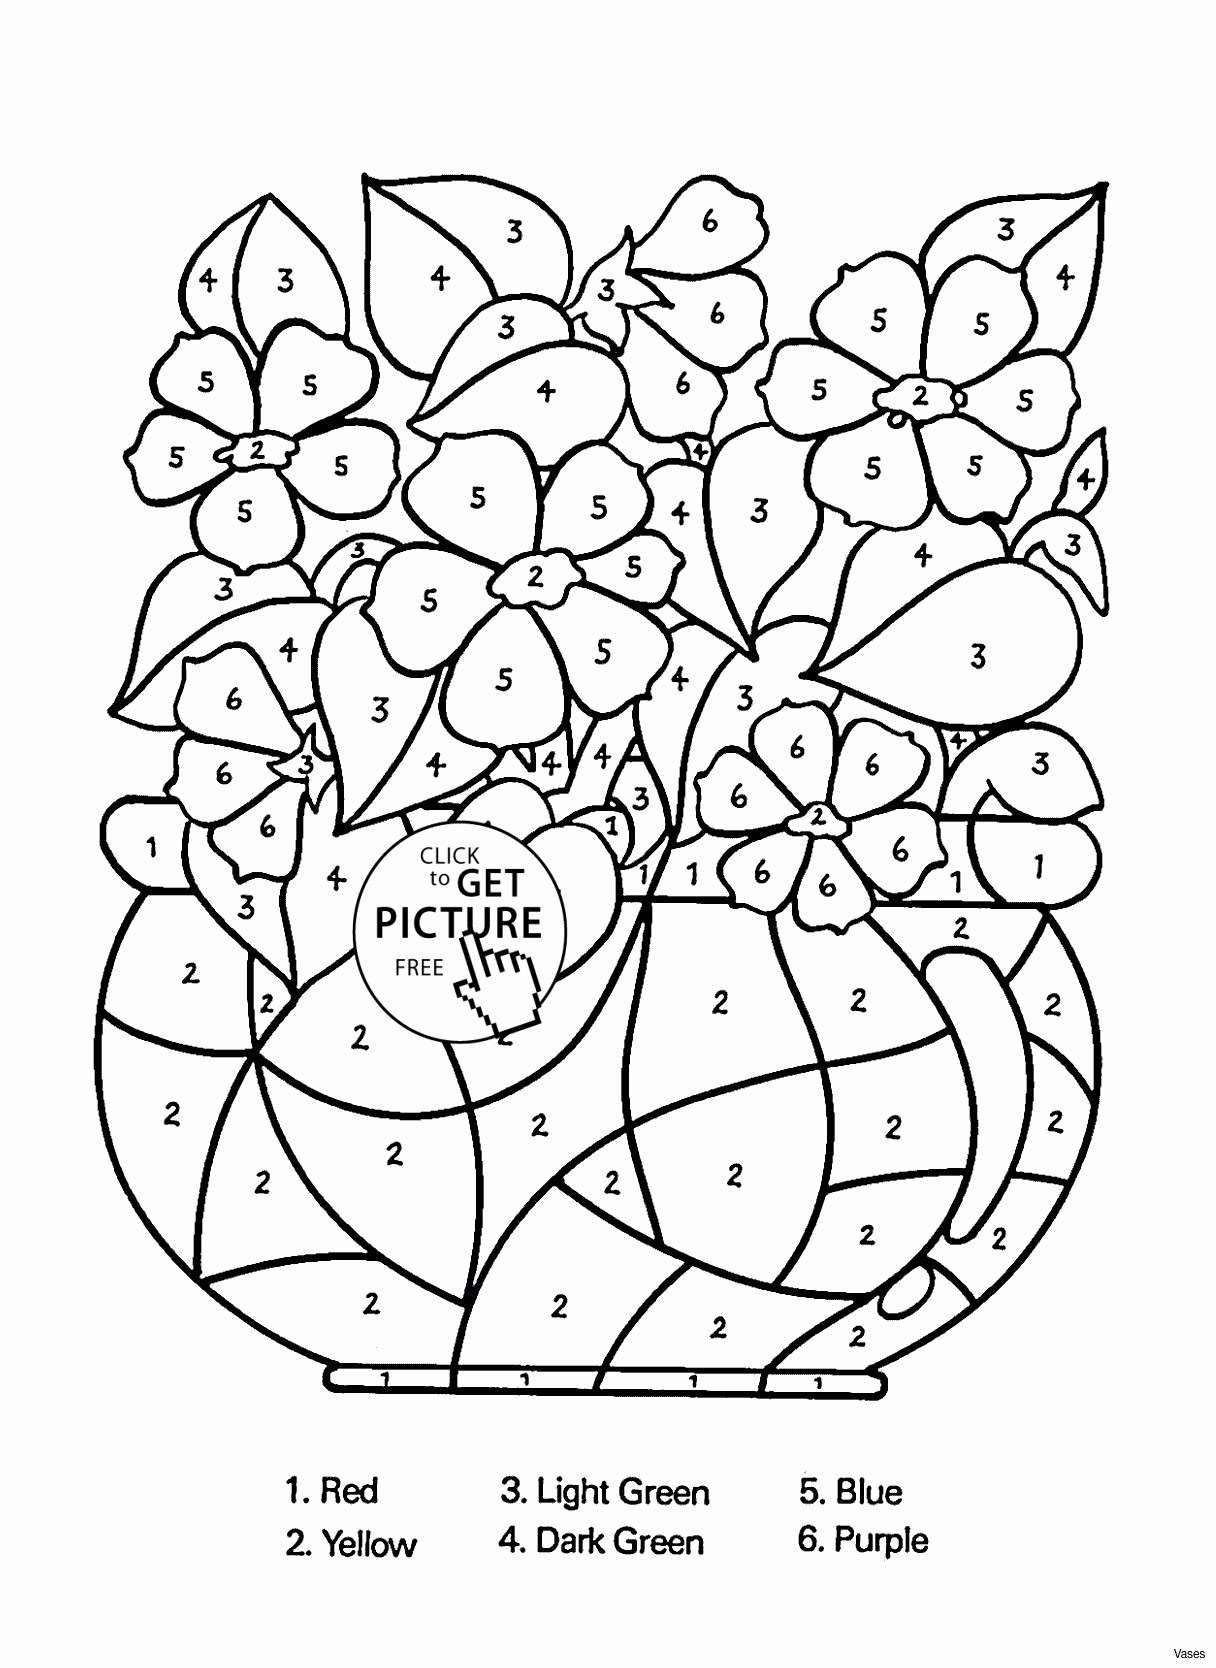 Silver Bowl Vase Of White Glass Vase Elegant Vases Flower Vase Coloring Page Pages for White Glass Vase Elegant Vases Flower Vase Coloring Page Pages Flowers In A top I 0d